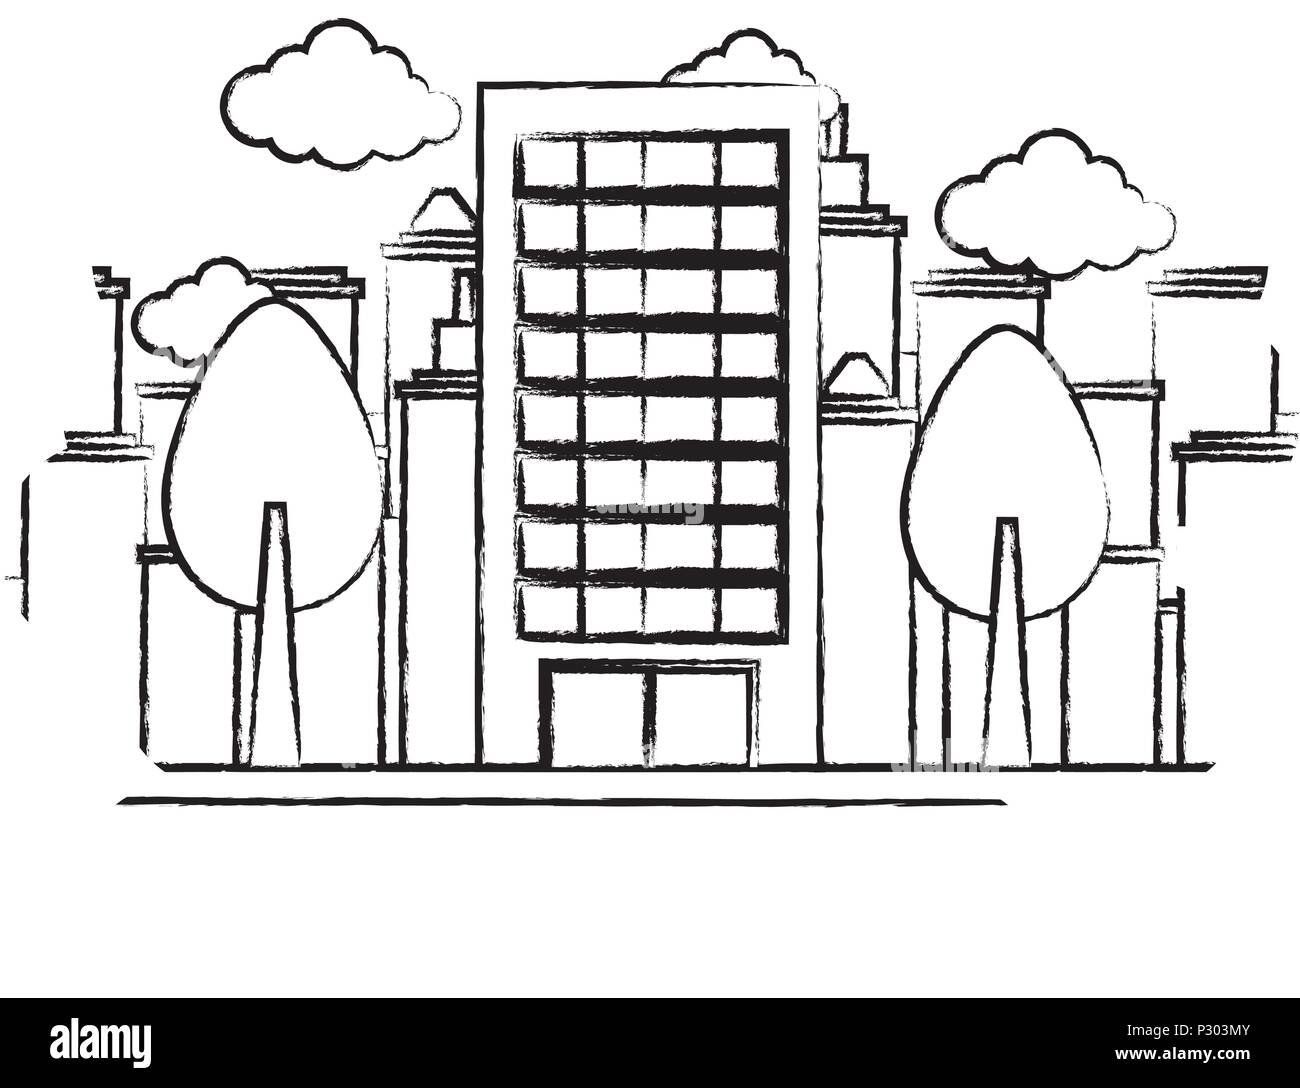 sketch of city building and trees over landscape and white background ...